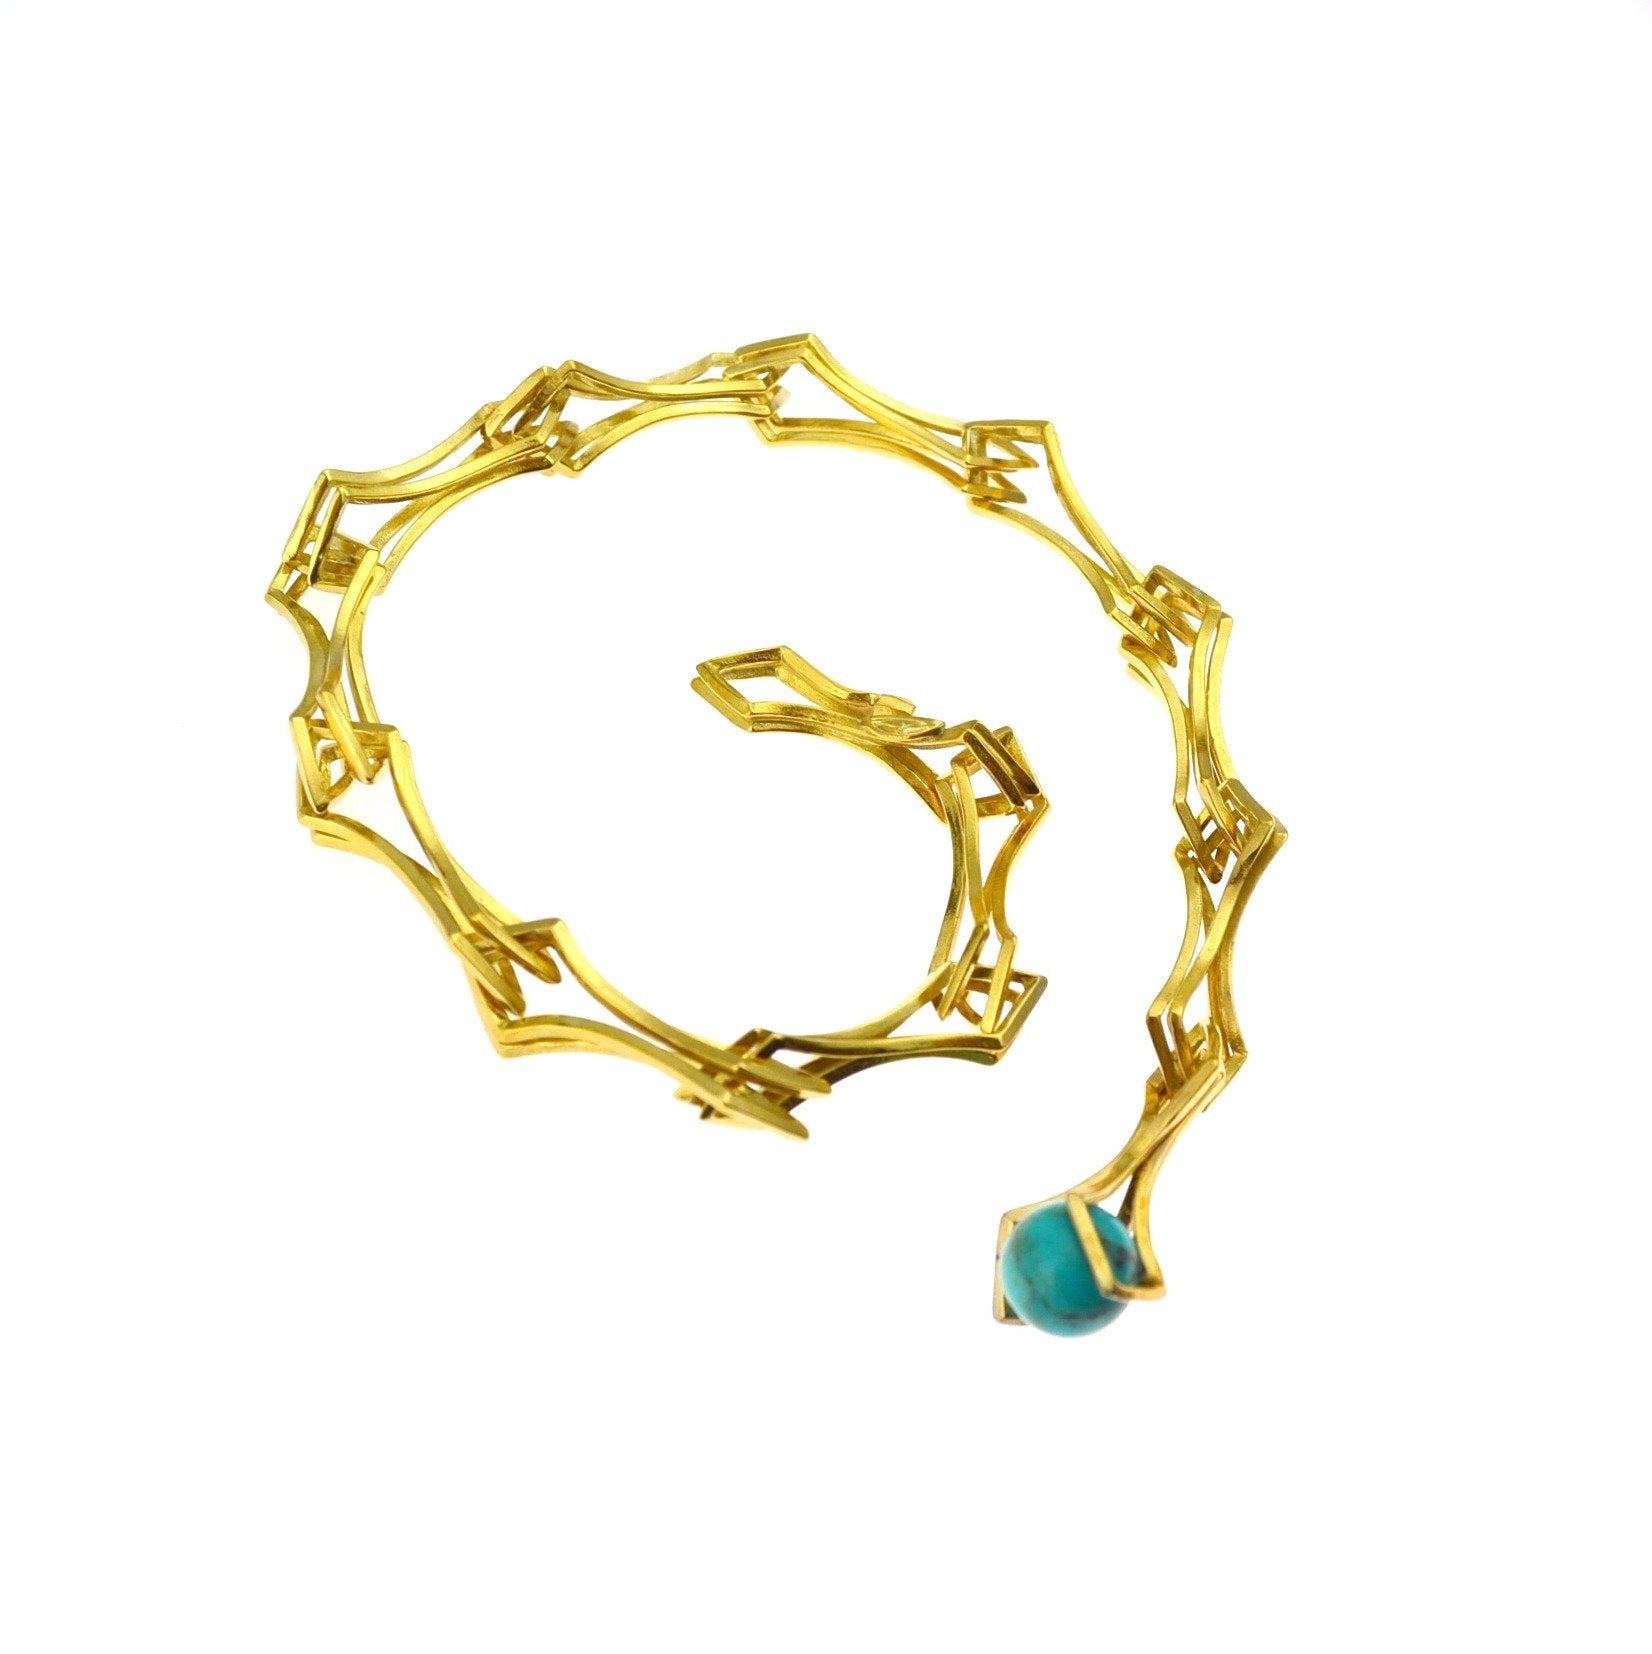 Double Diamond Link Bracelet in 24k Gold on Sterling Silver and Turquoise